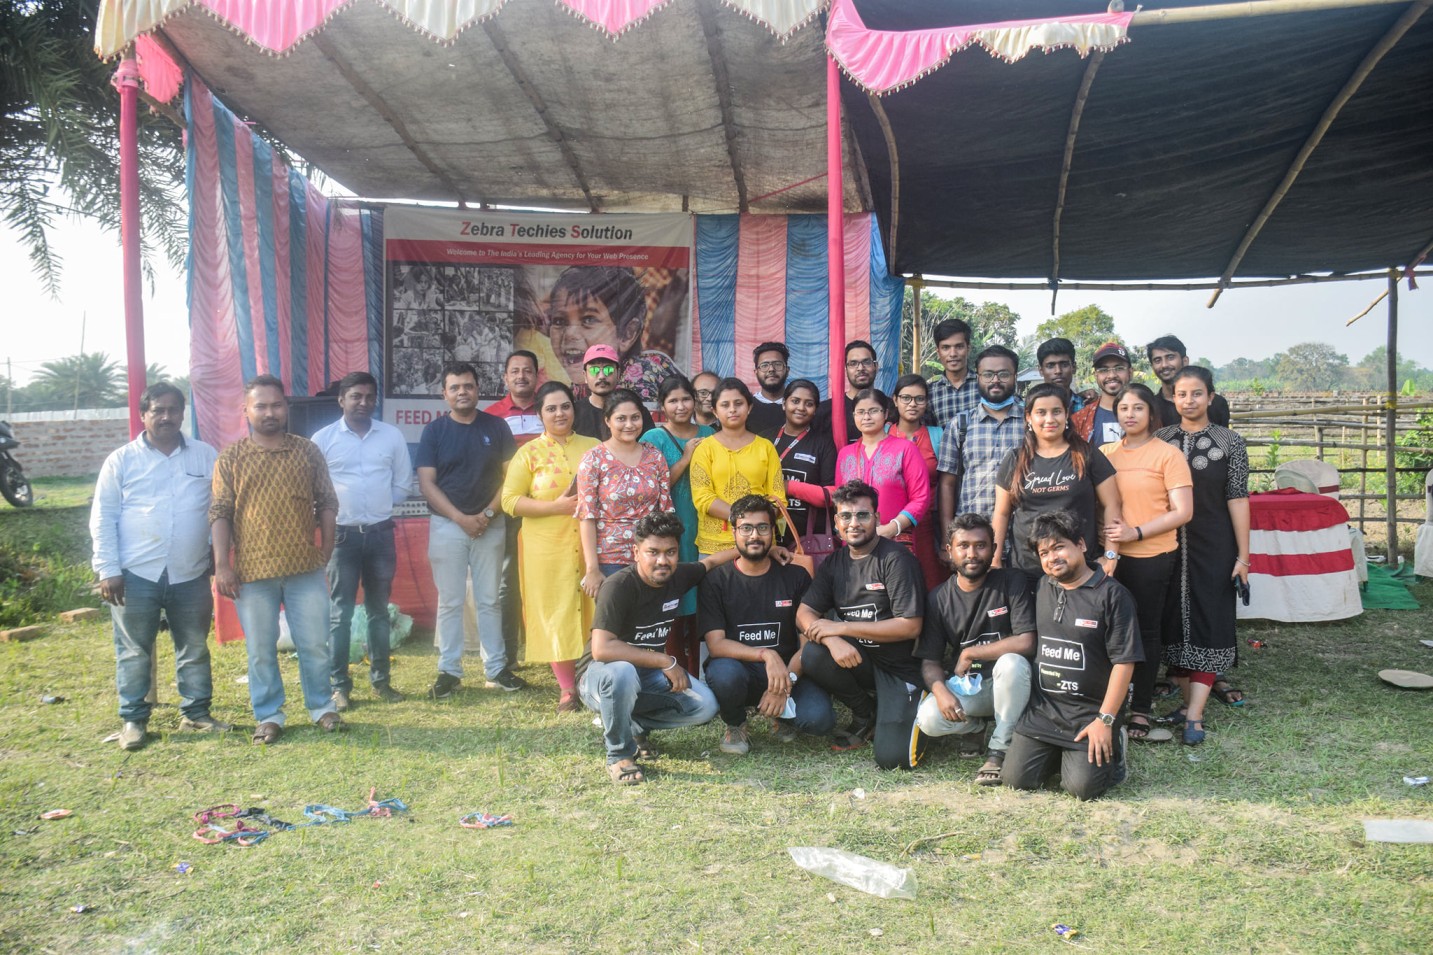 Zebra Techies Solution’s CSR Program Feed Me Campaign Making a Difference